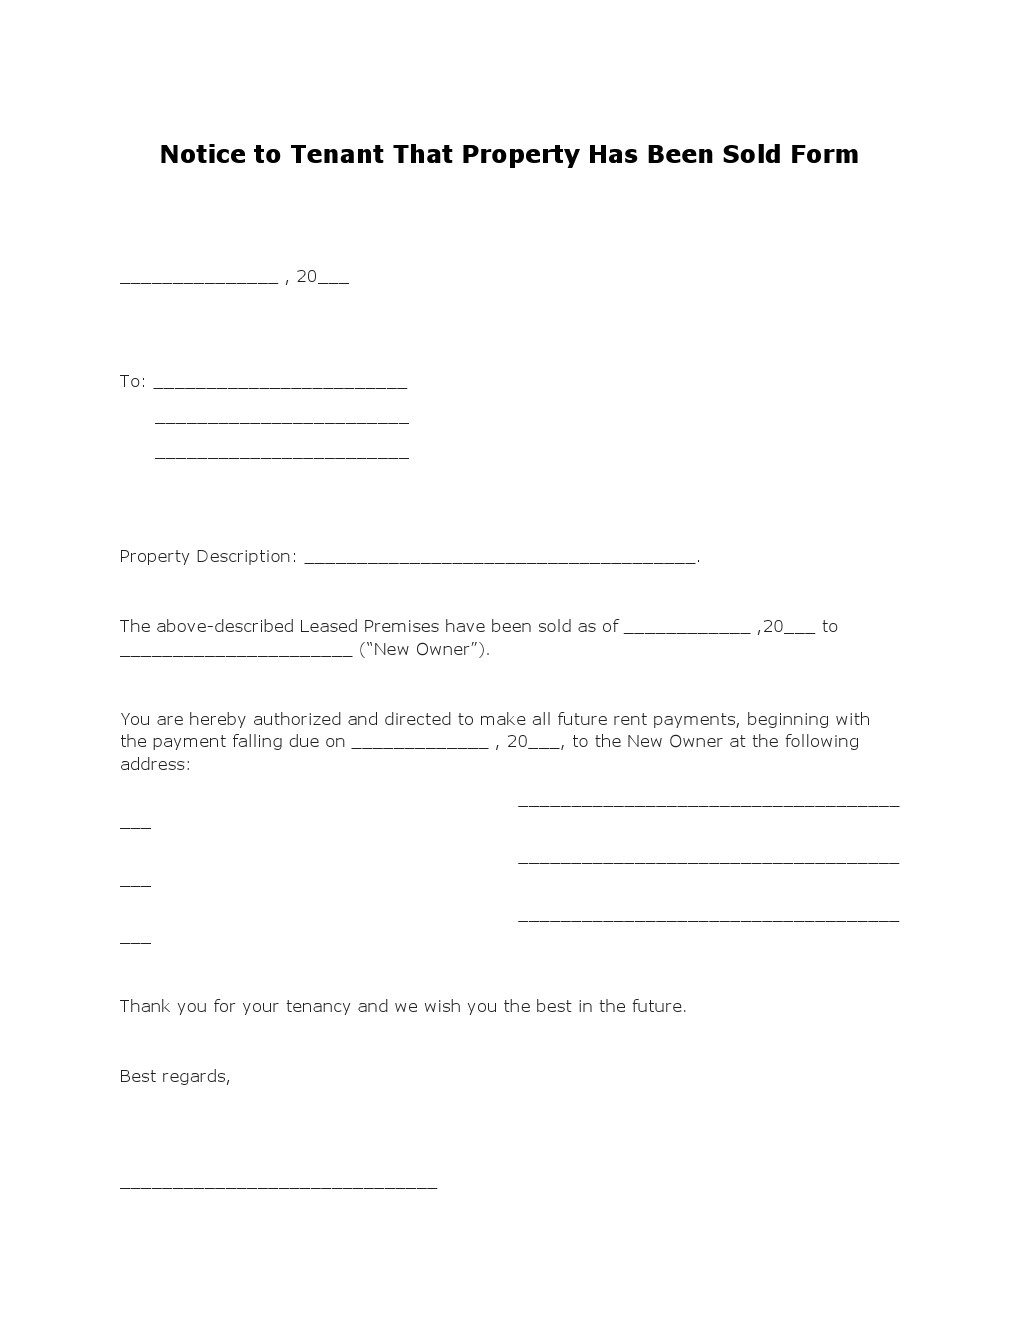 Notice to Tenant That Property Has Been Sold